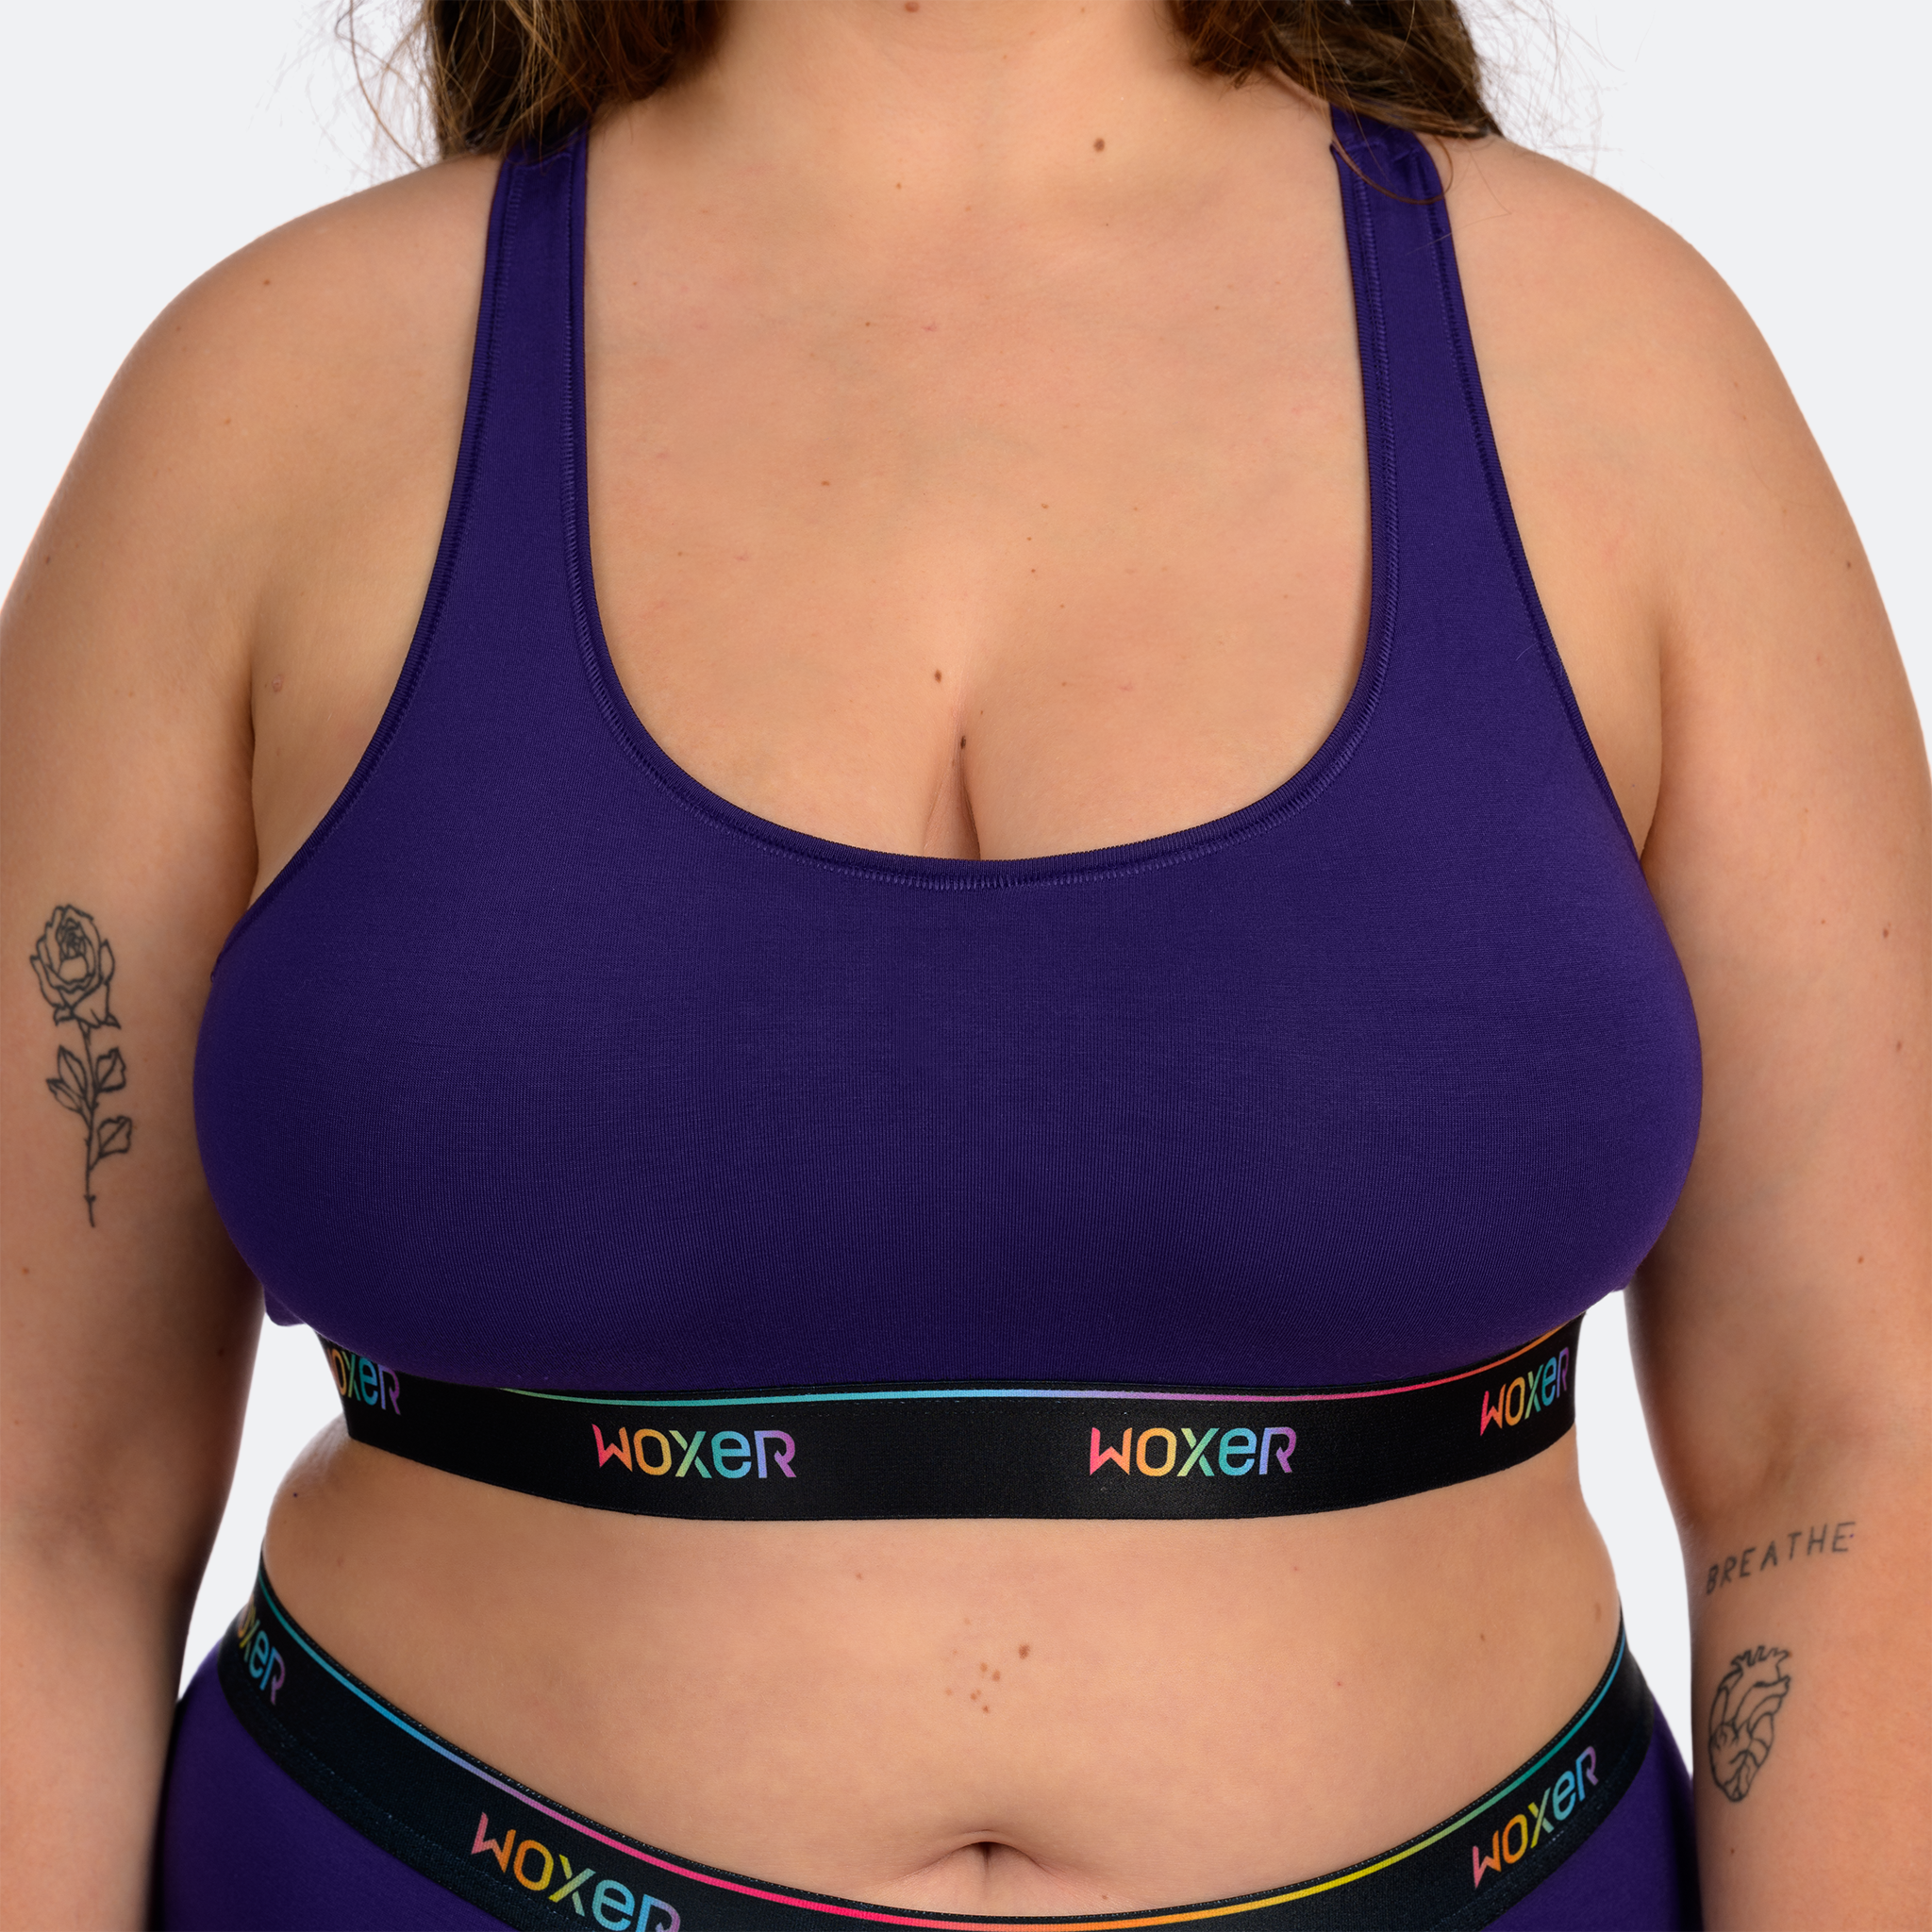 Woxer BOSS Bralette: Inclusive Sizing & Sustainably Made. on